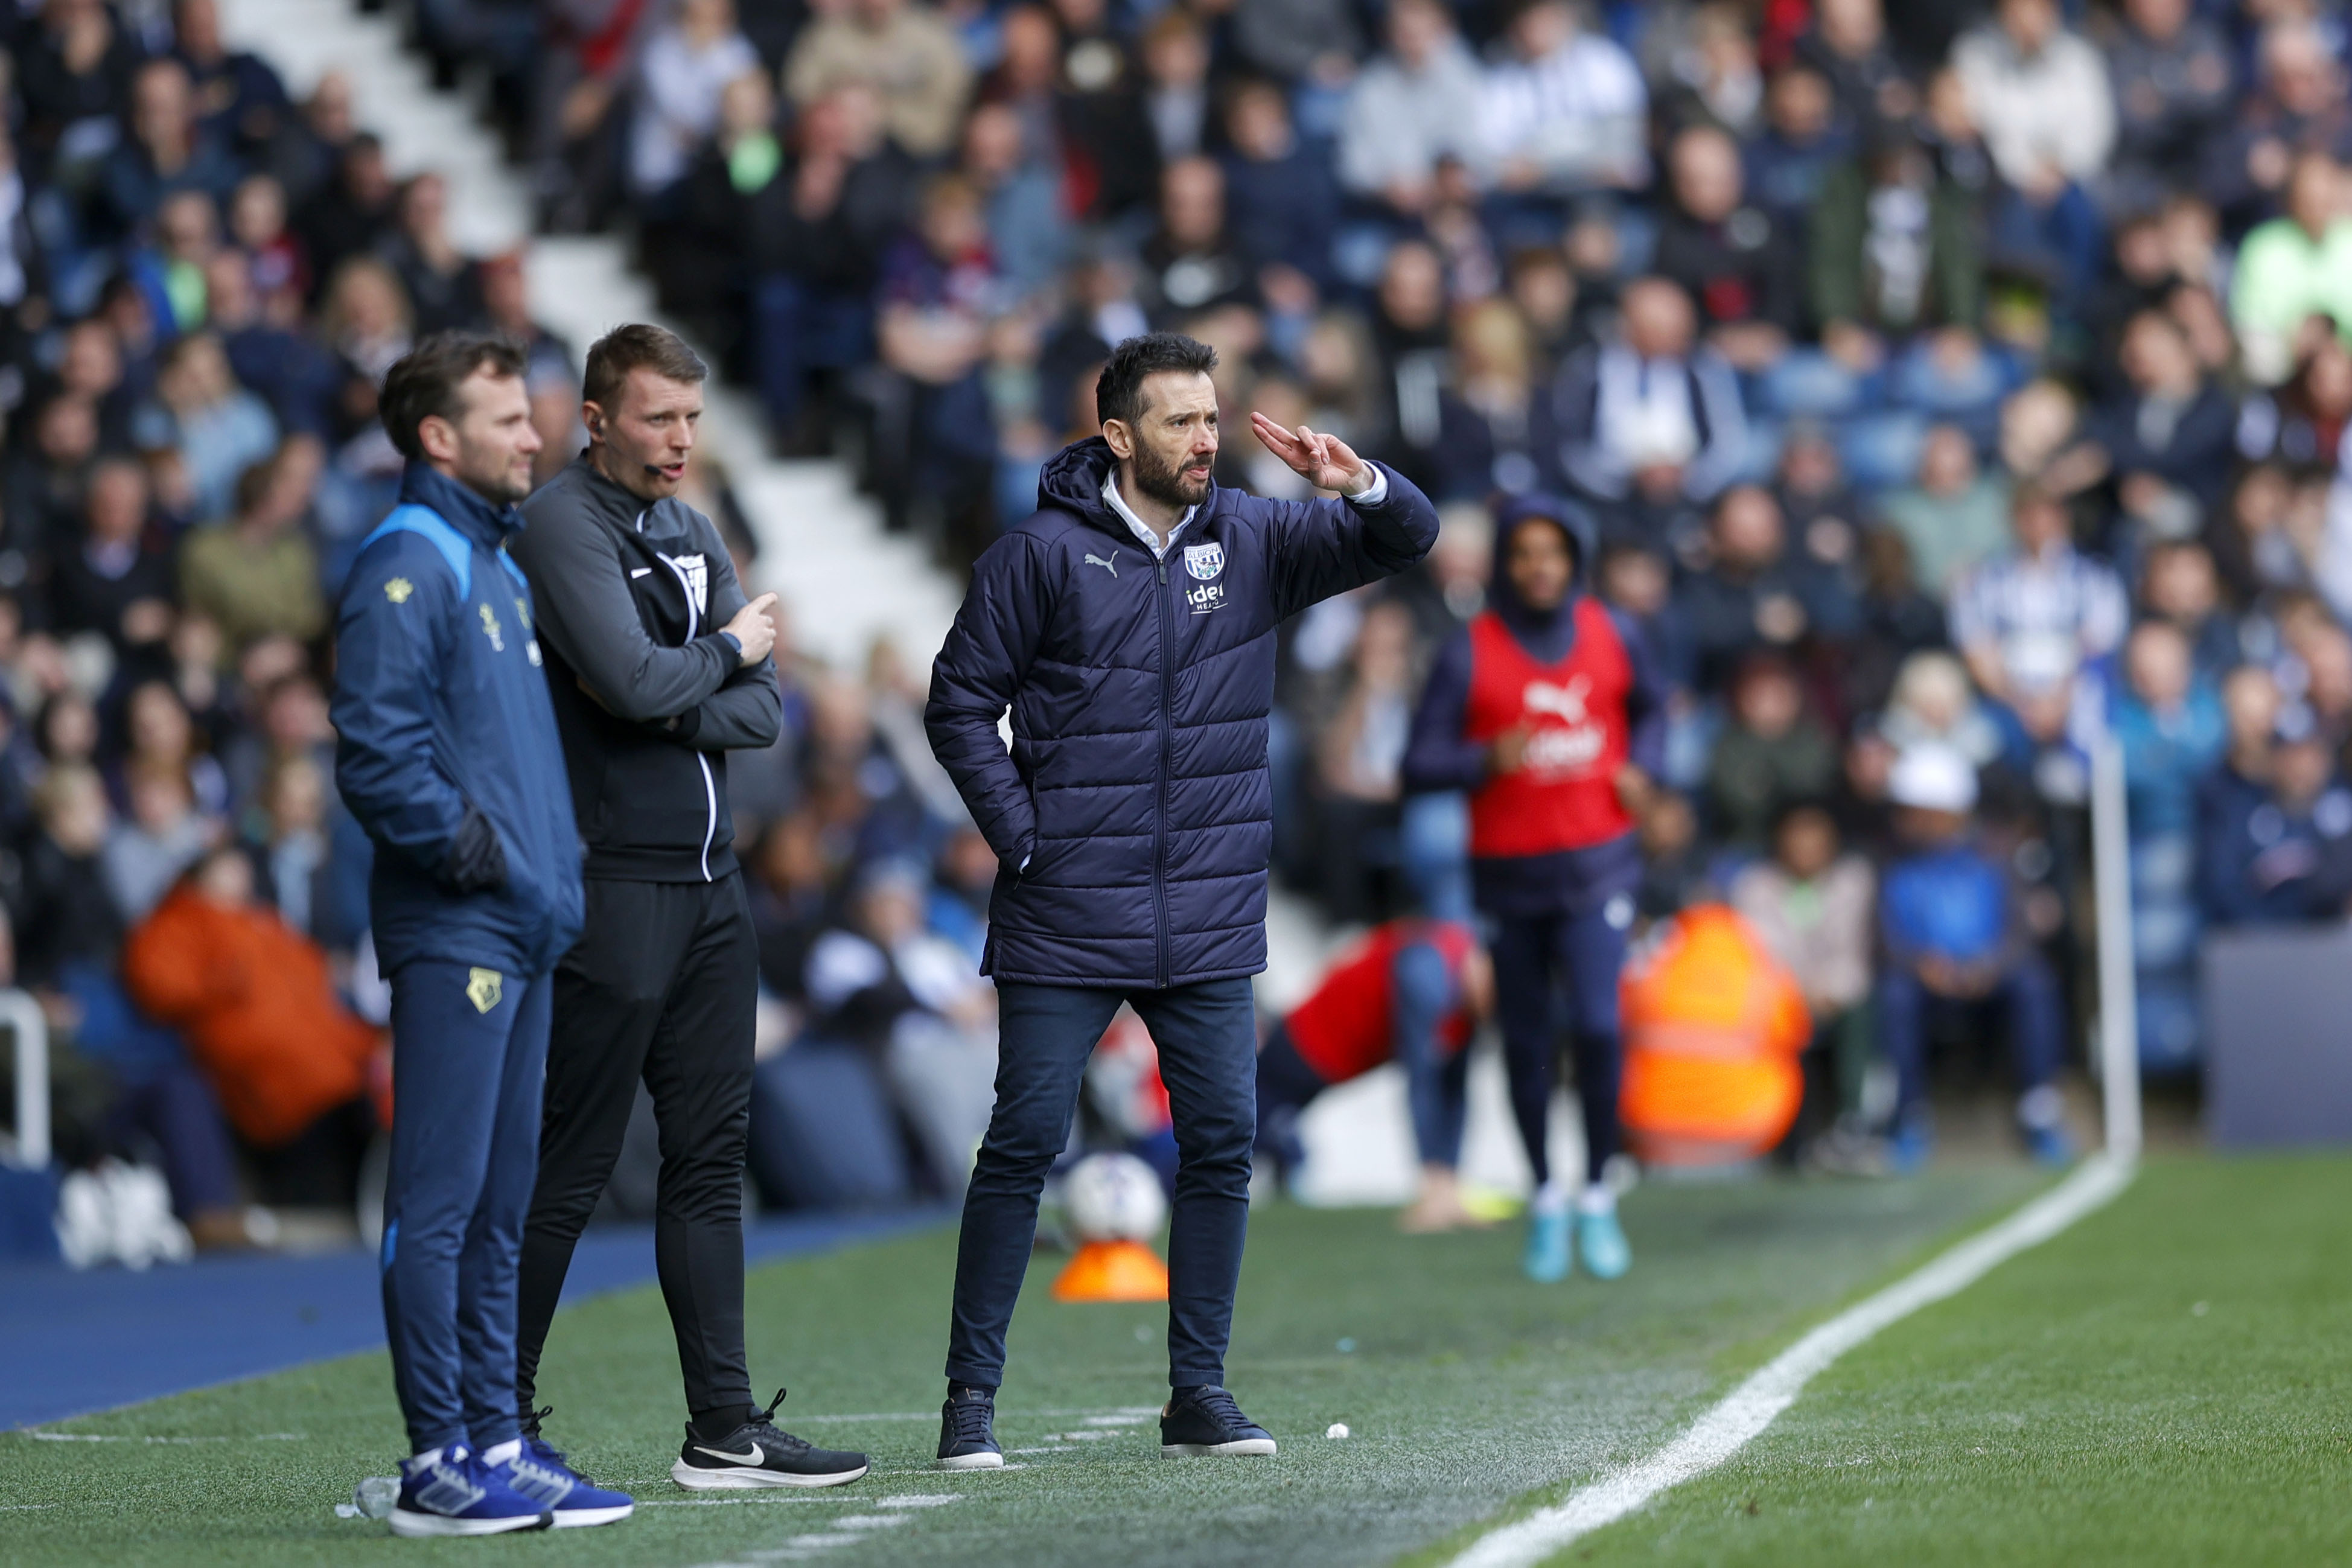 Carlos Corberán delivering instructions to his players on the side of the pitch at The Hawthorns